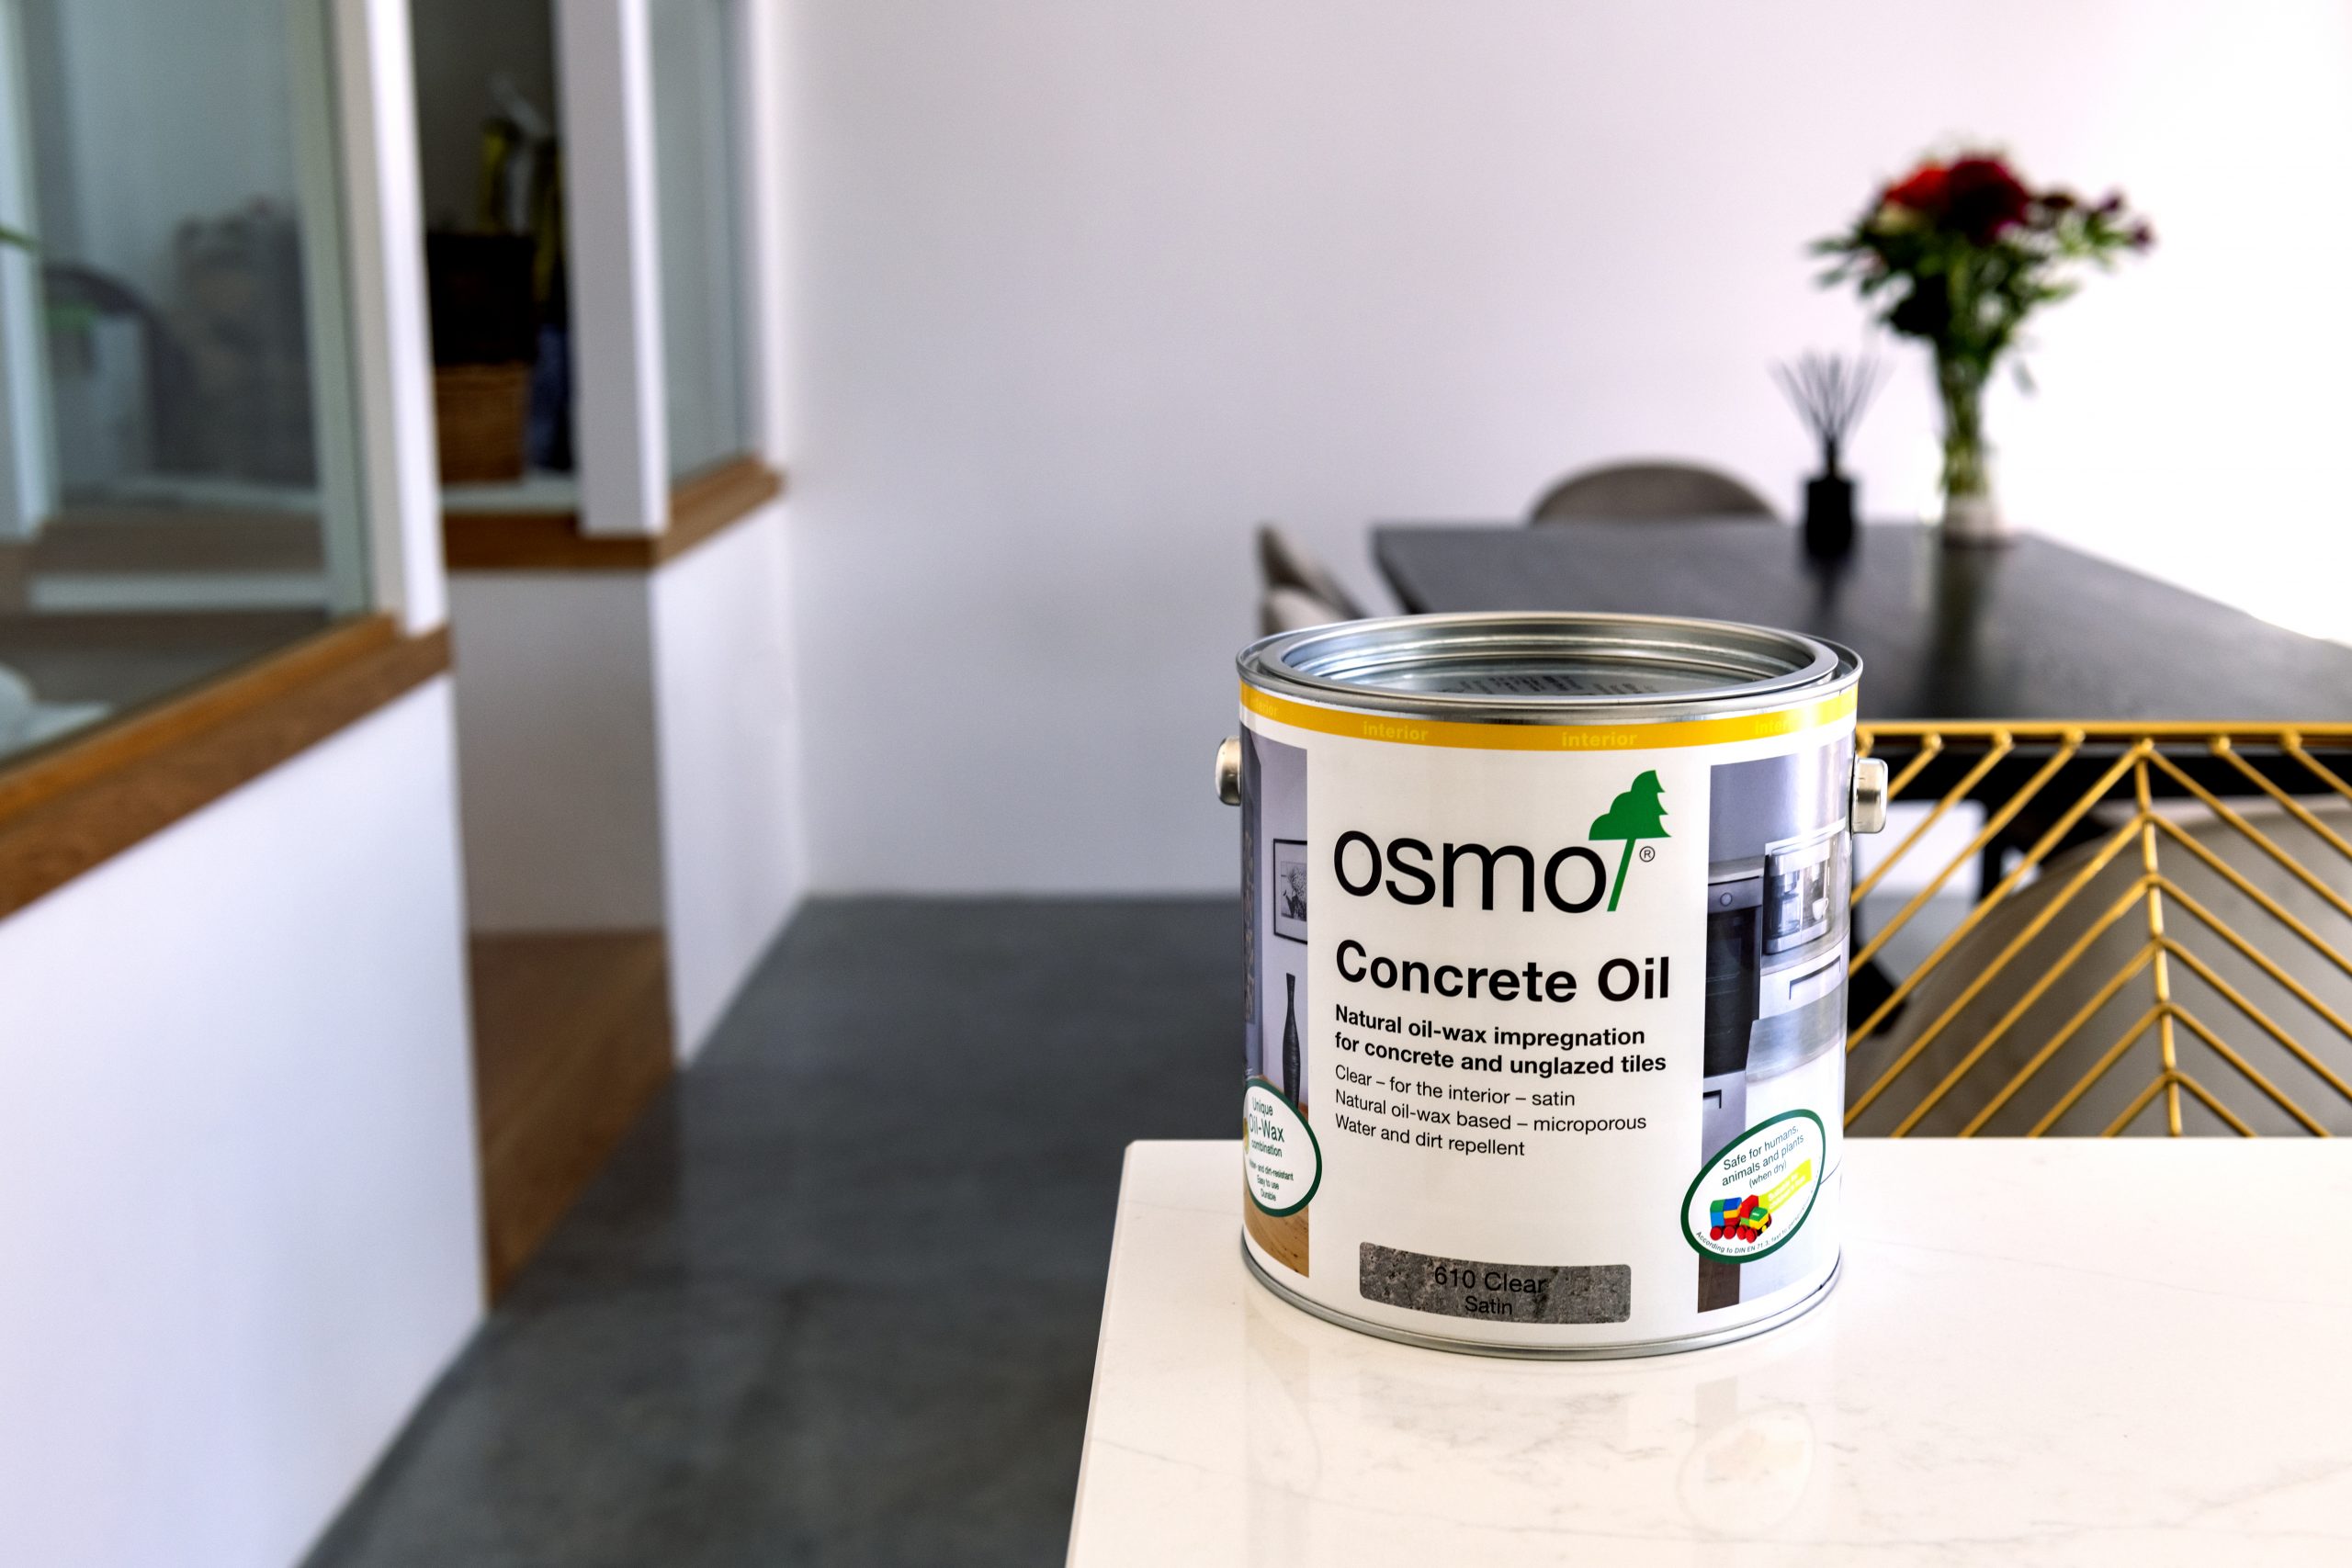 Concrete seals the deal for architects and designers @osmo_uk